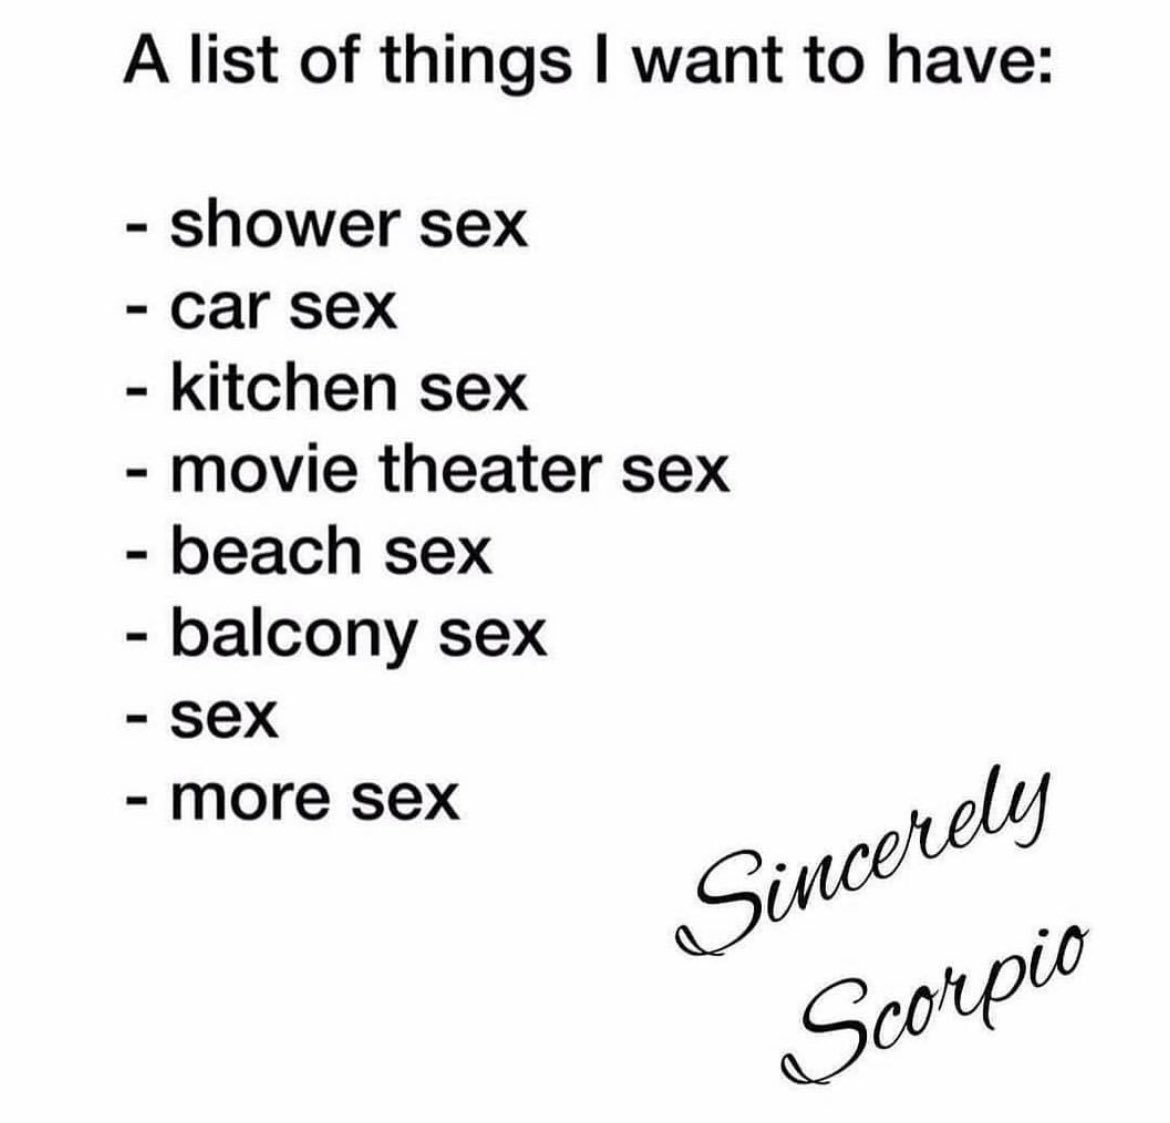 Scorpio’s a lil freaky #scorpiolover you agree ? 🦂